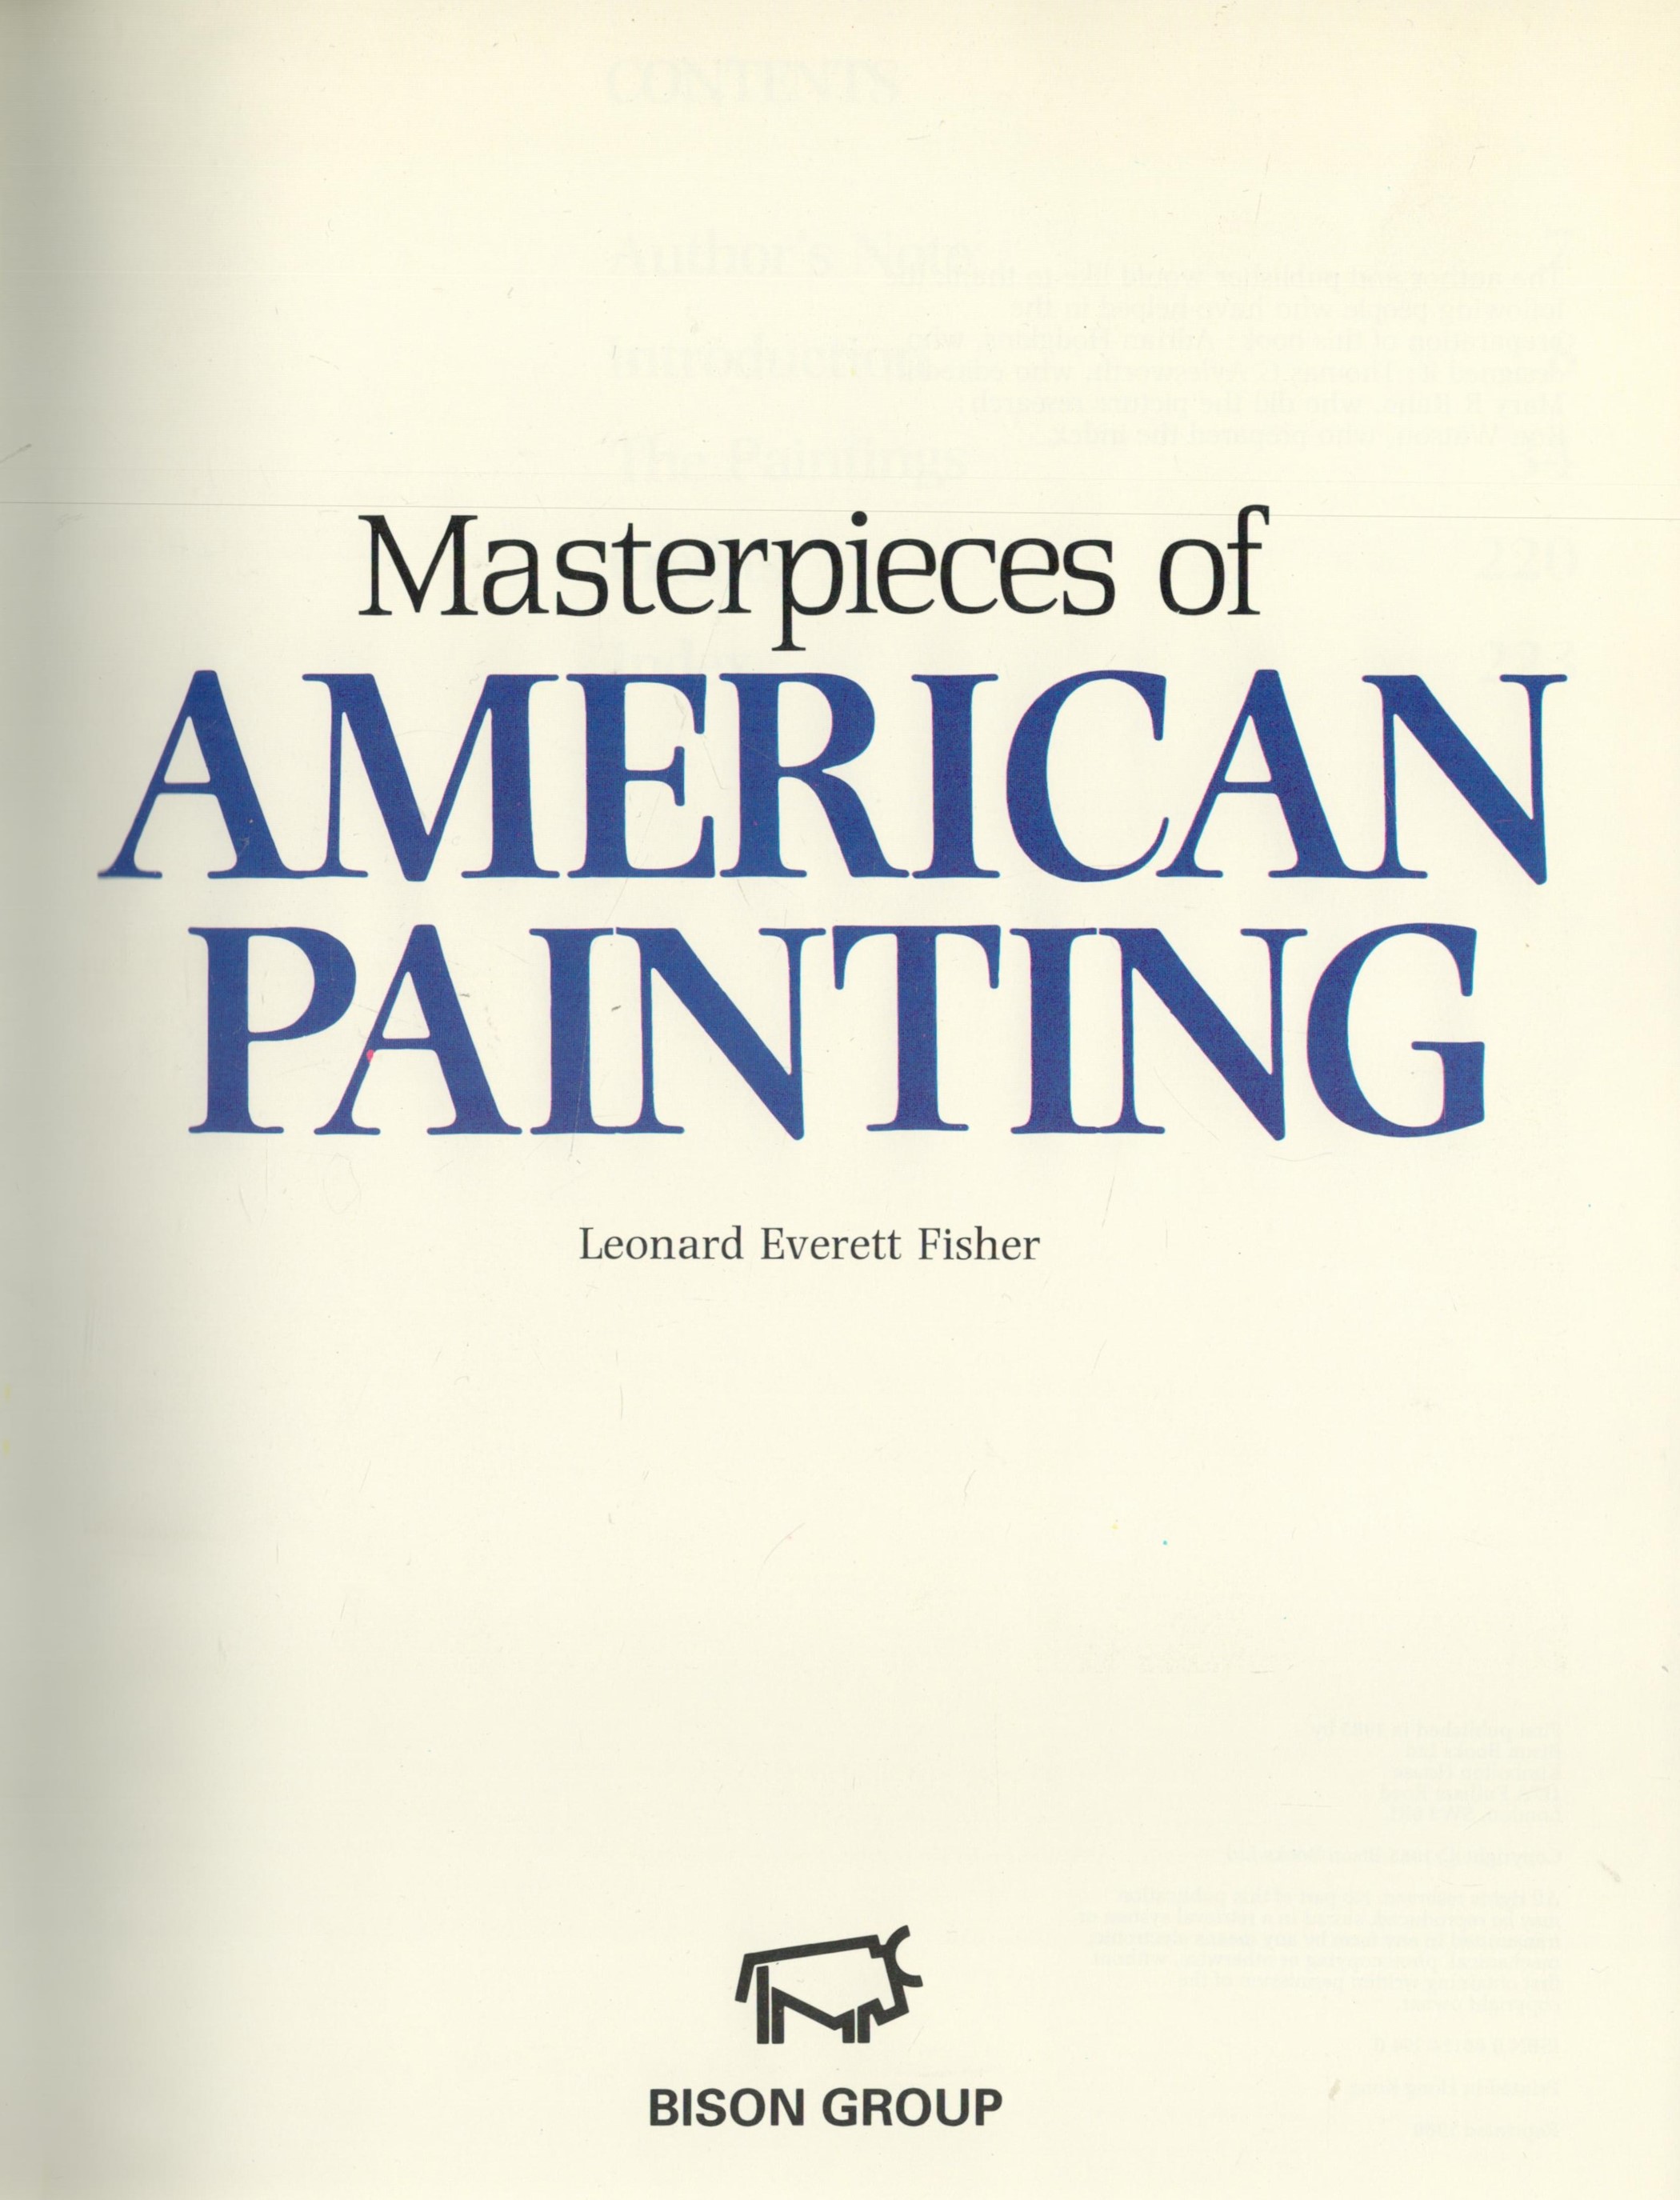 Masterpieces of American Painting by Leonard Everett Fisher 1985 First Edition Hardback Book with - Image 2 of 3